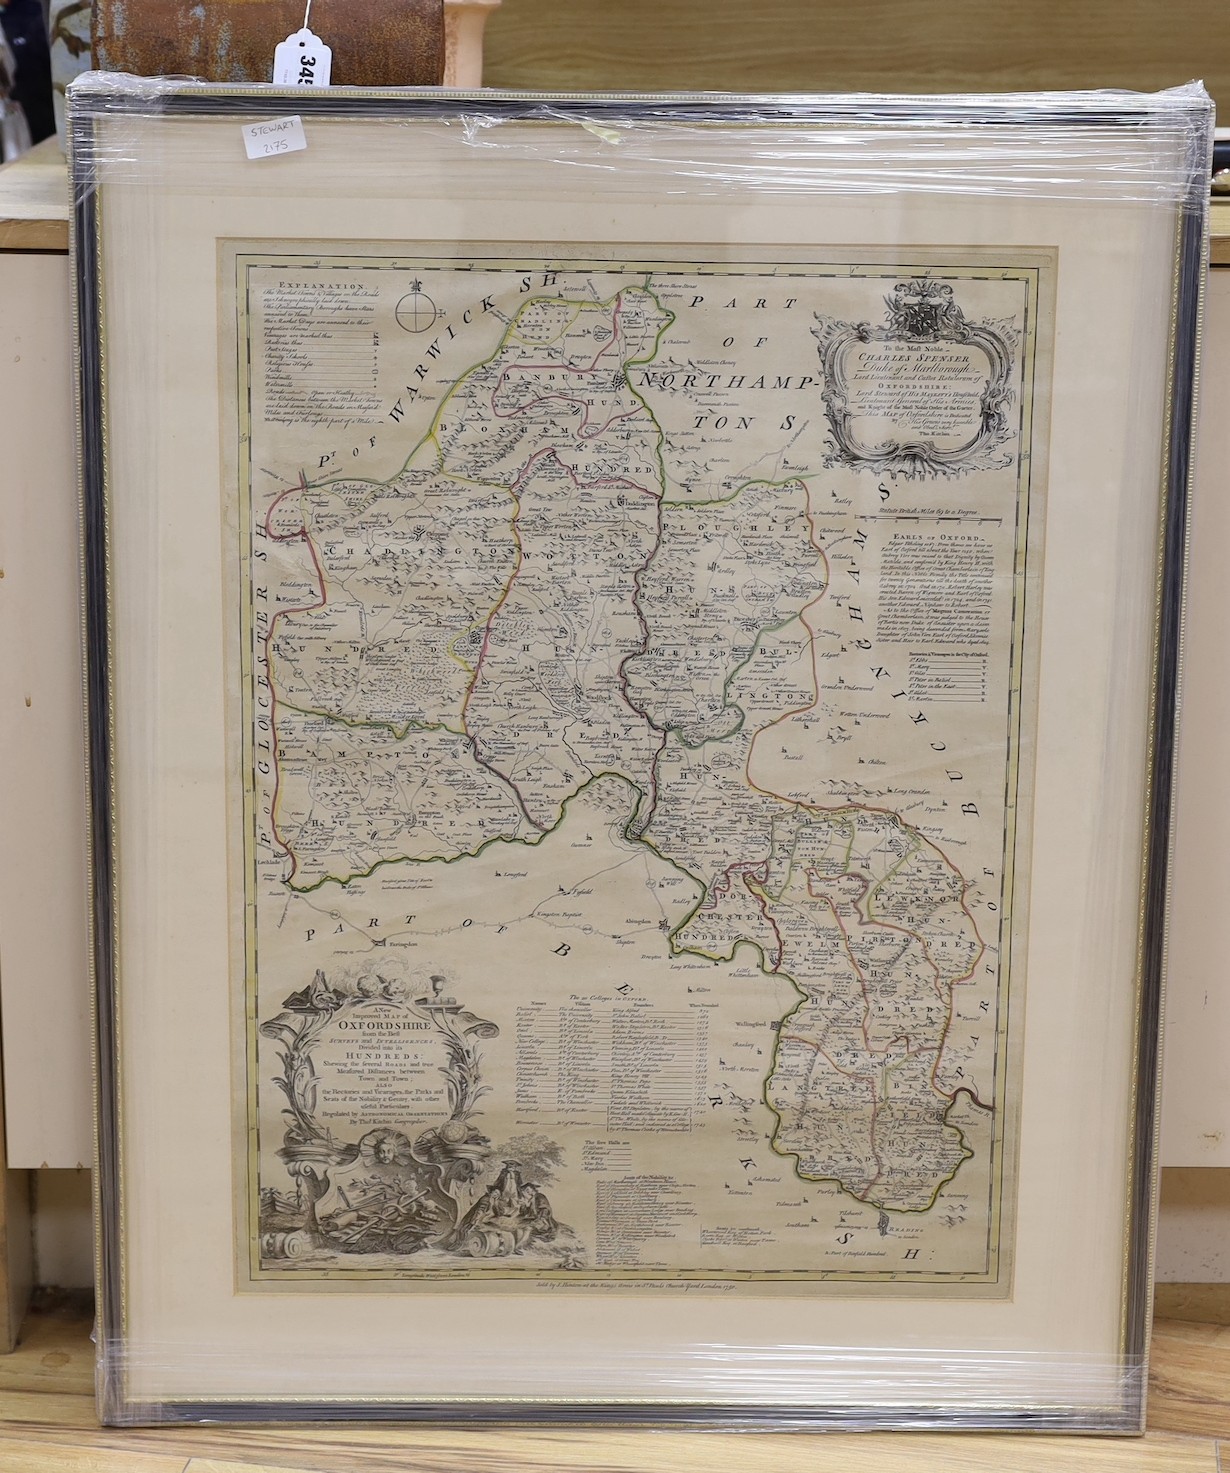 Thomas Kitchin, coloured engraving, A New and Improved Map of Oxfordshire, sold by J. Hinton,